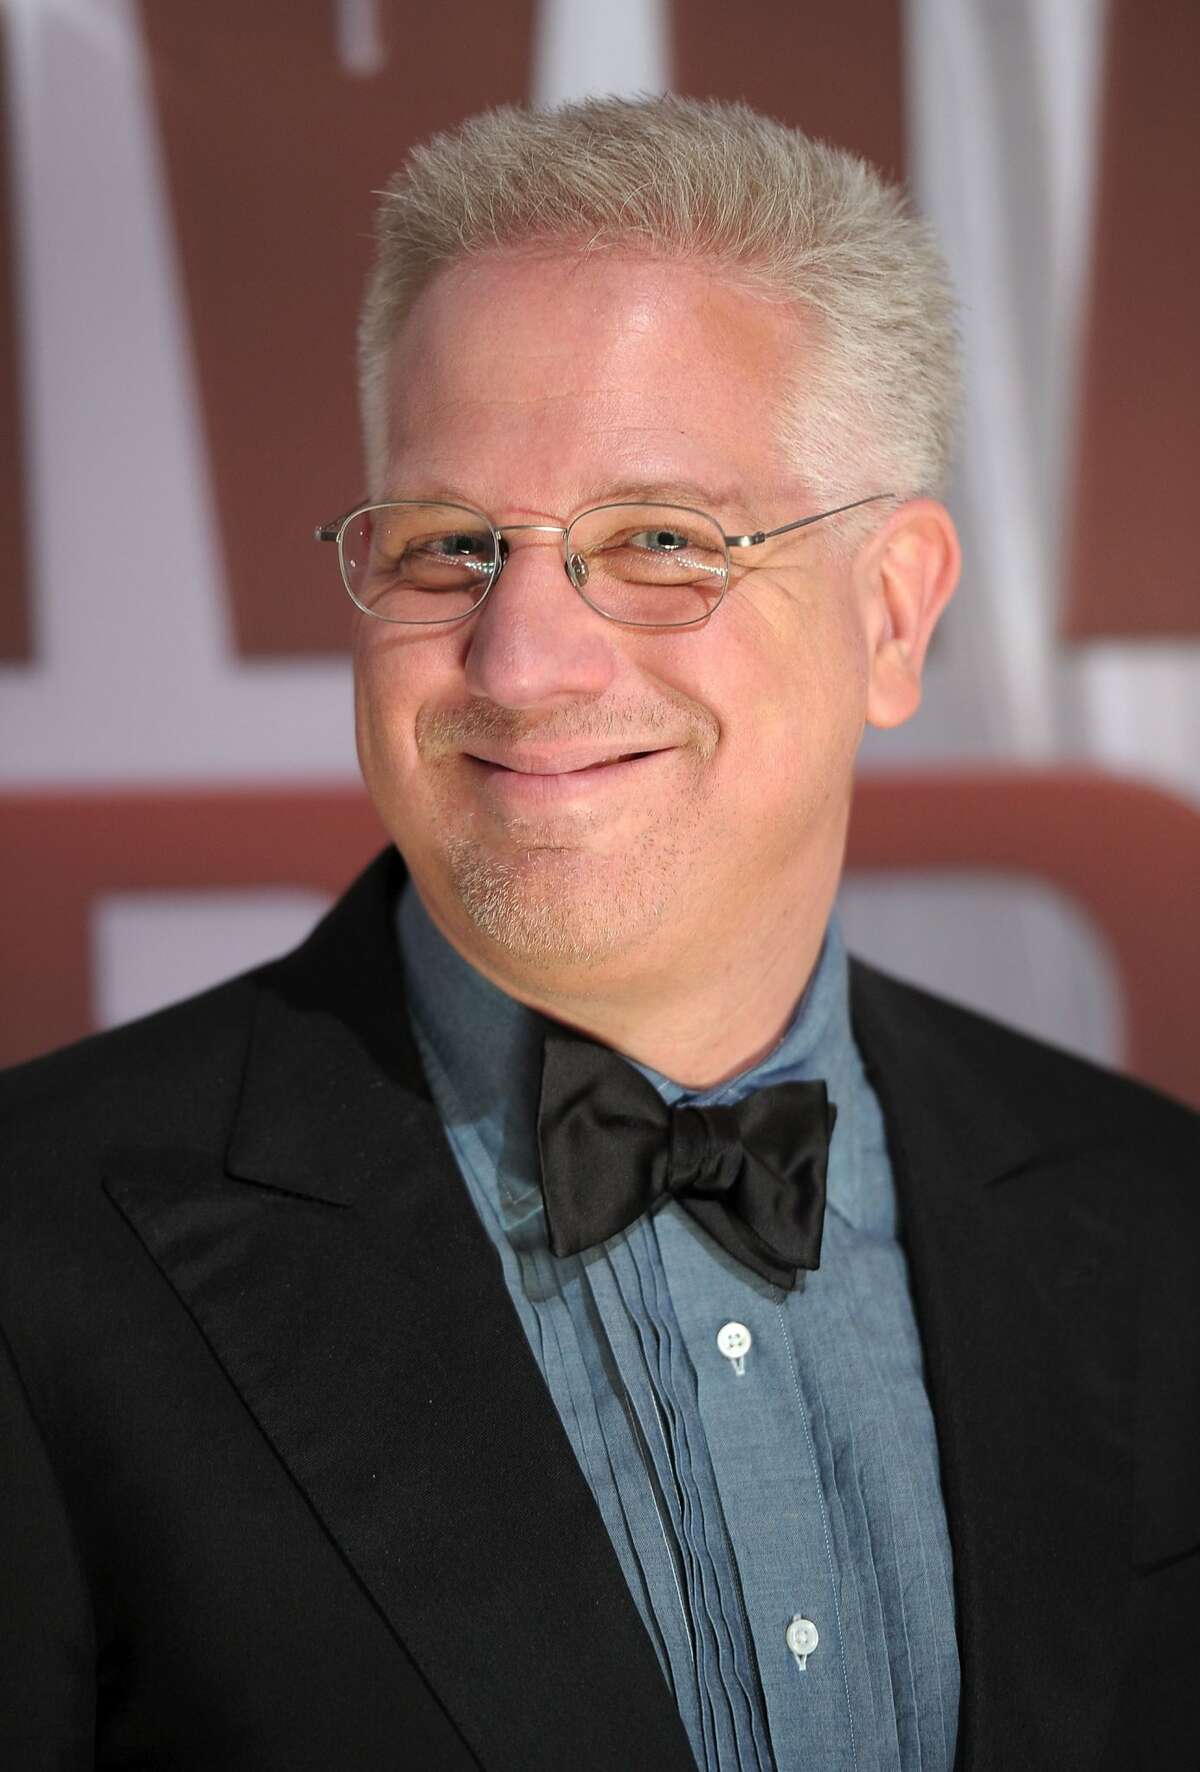 Glenn Beck is a native son, born in Everett and a graduate of Bellingham's Sehome High School, while Bill O'Reilly has decried our progressive ways.